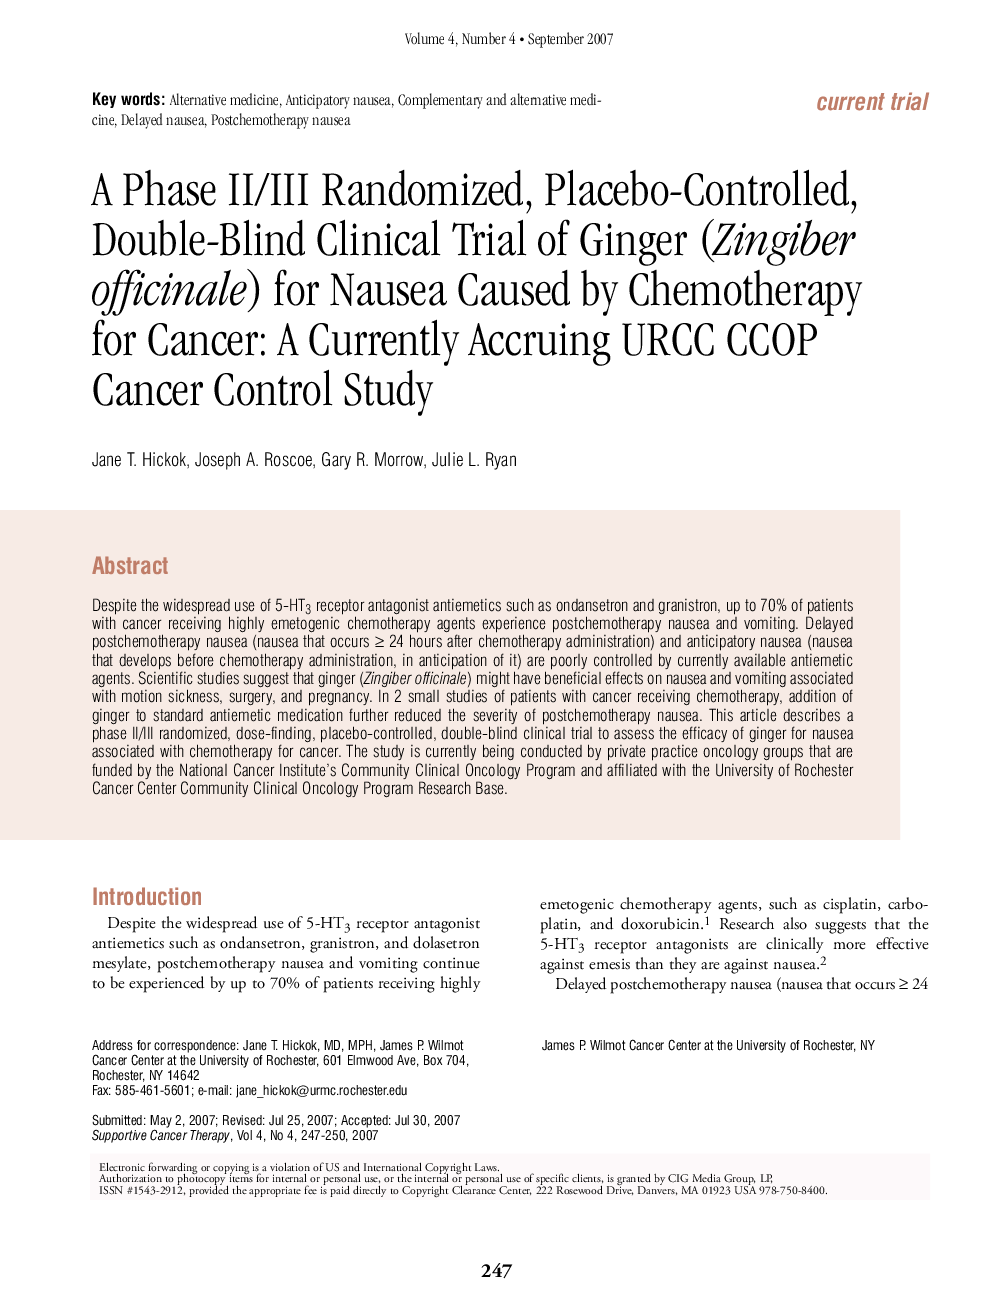 A Phase II/III Randomized, Placebo-Controlled, Double-Blind Clinical Trial of Ginger (Zingiber officinale) for Nausea Caused by Chemotherapy for Cancer: A Currently Accruing URCC CCOP Cancer Control Study